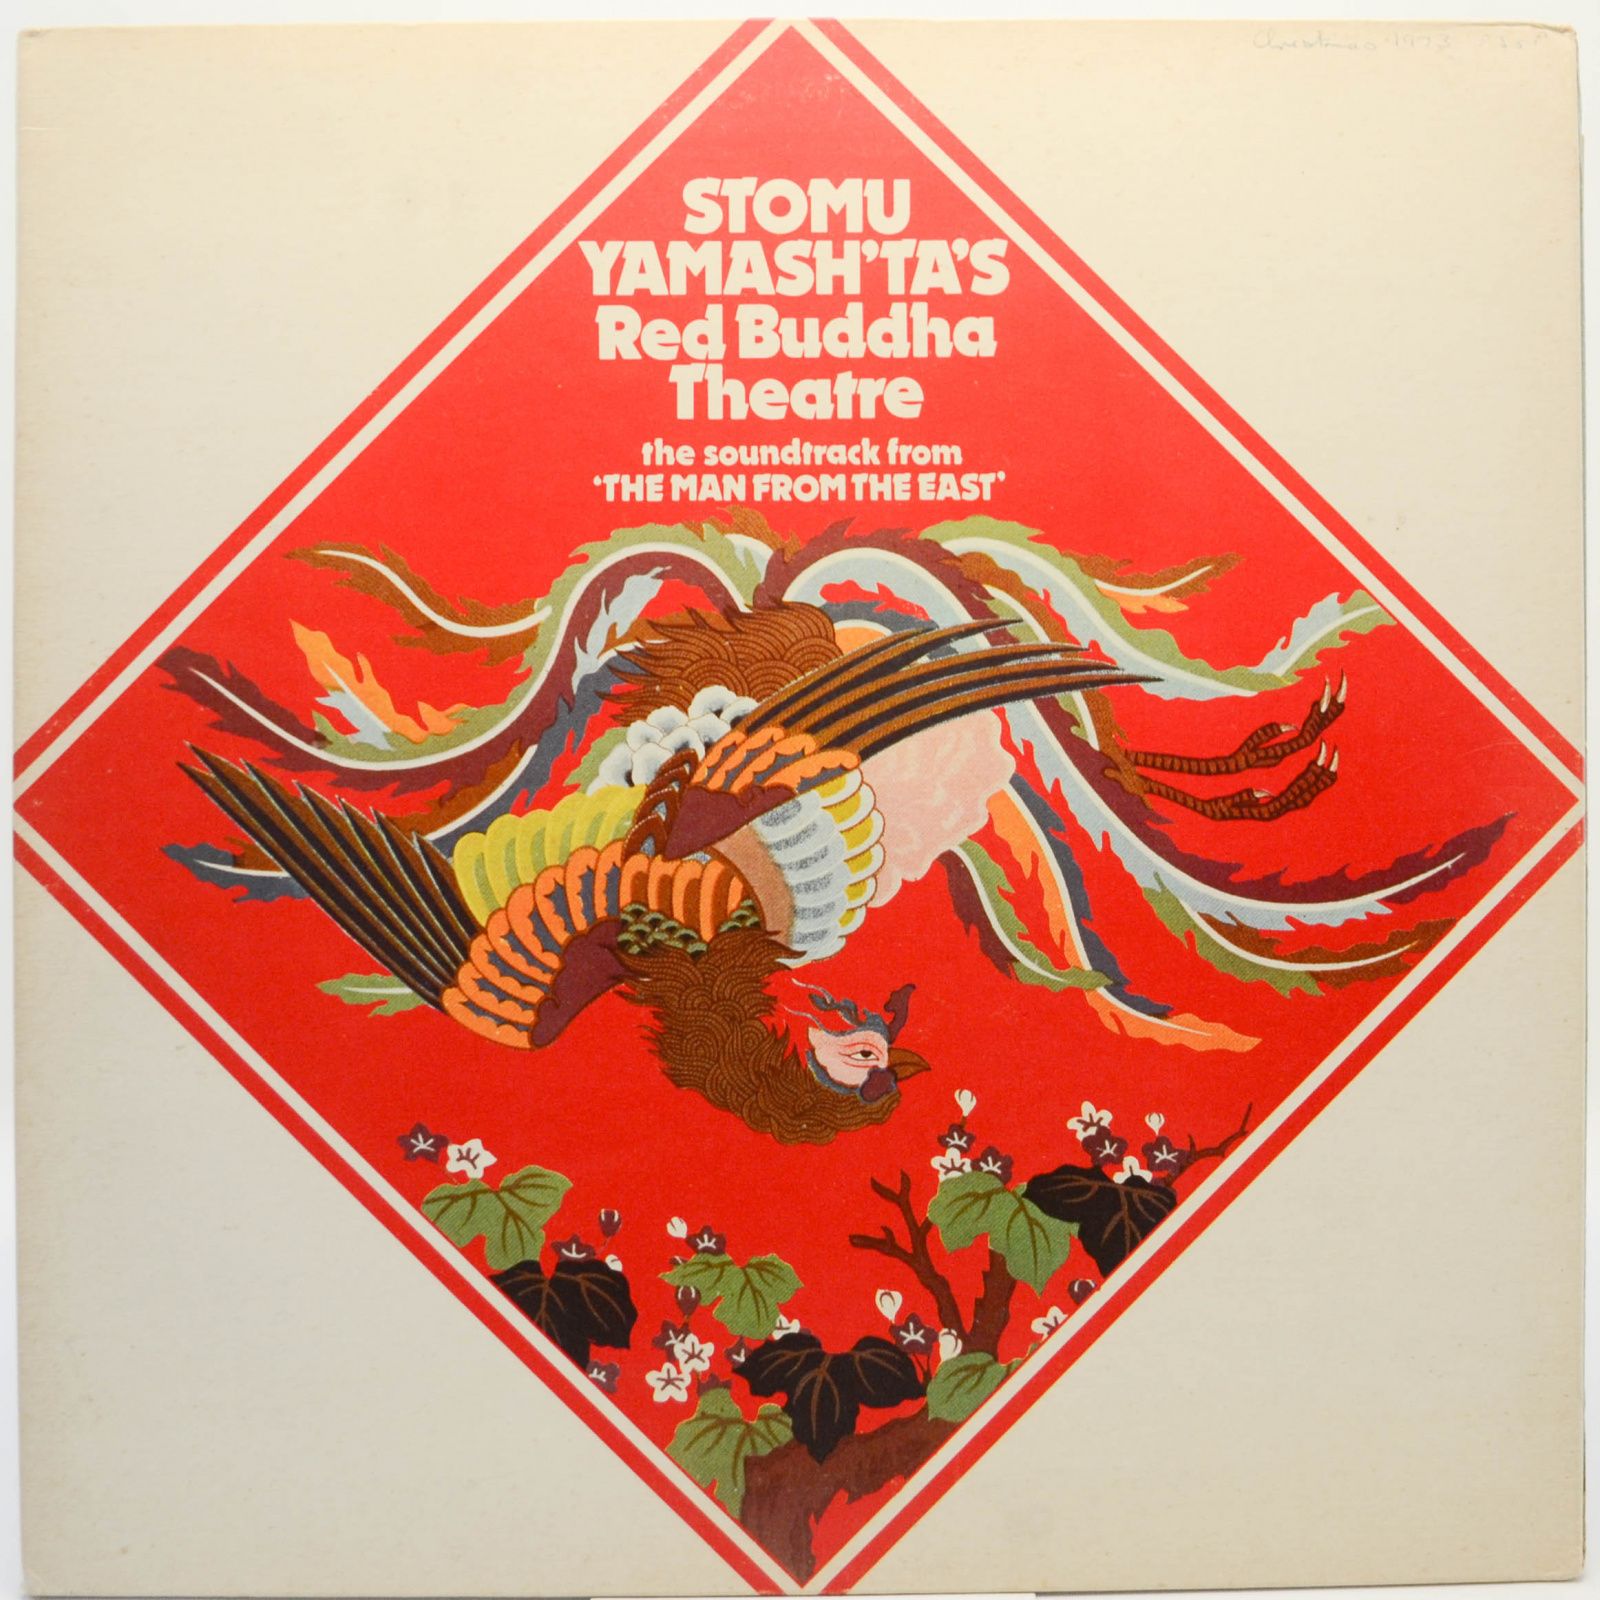 Stomu Yamash'ta's Red Buddha Theatre — The Soundtrack From "The Man From The East" (UK), 1973